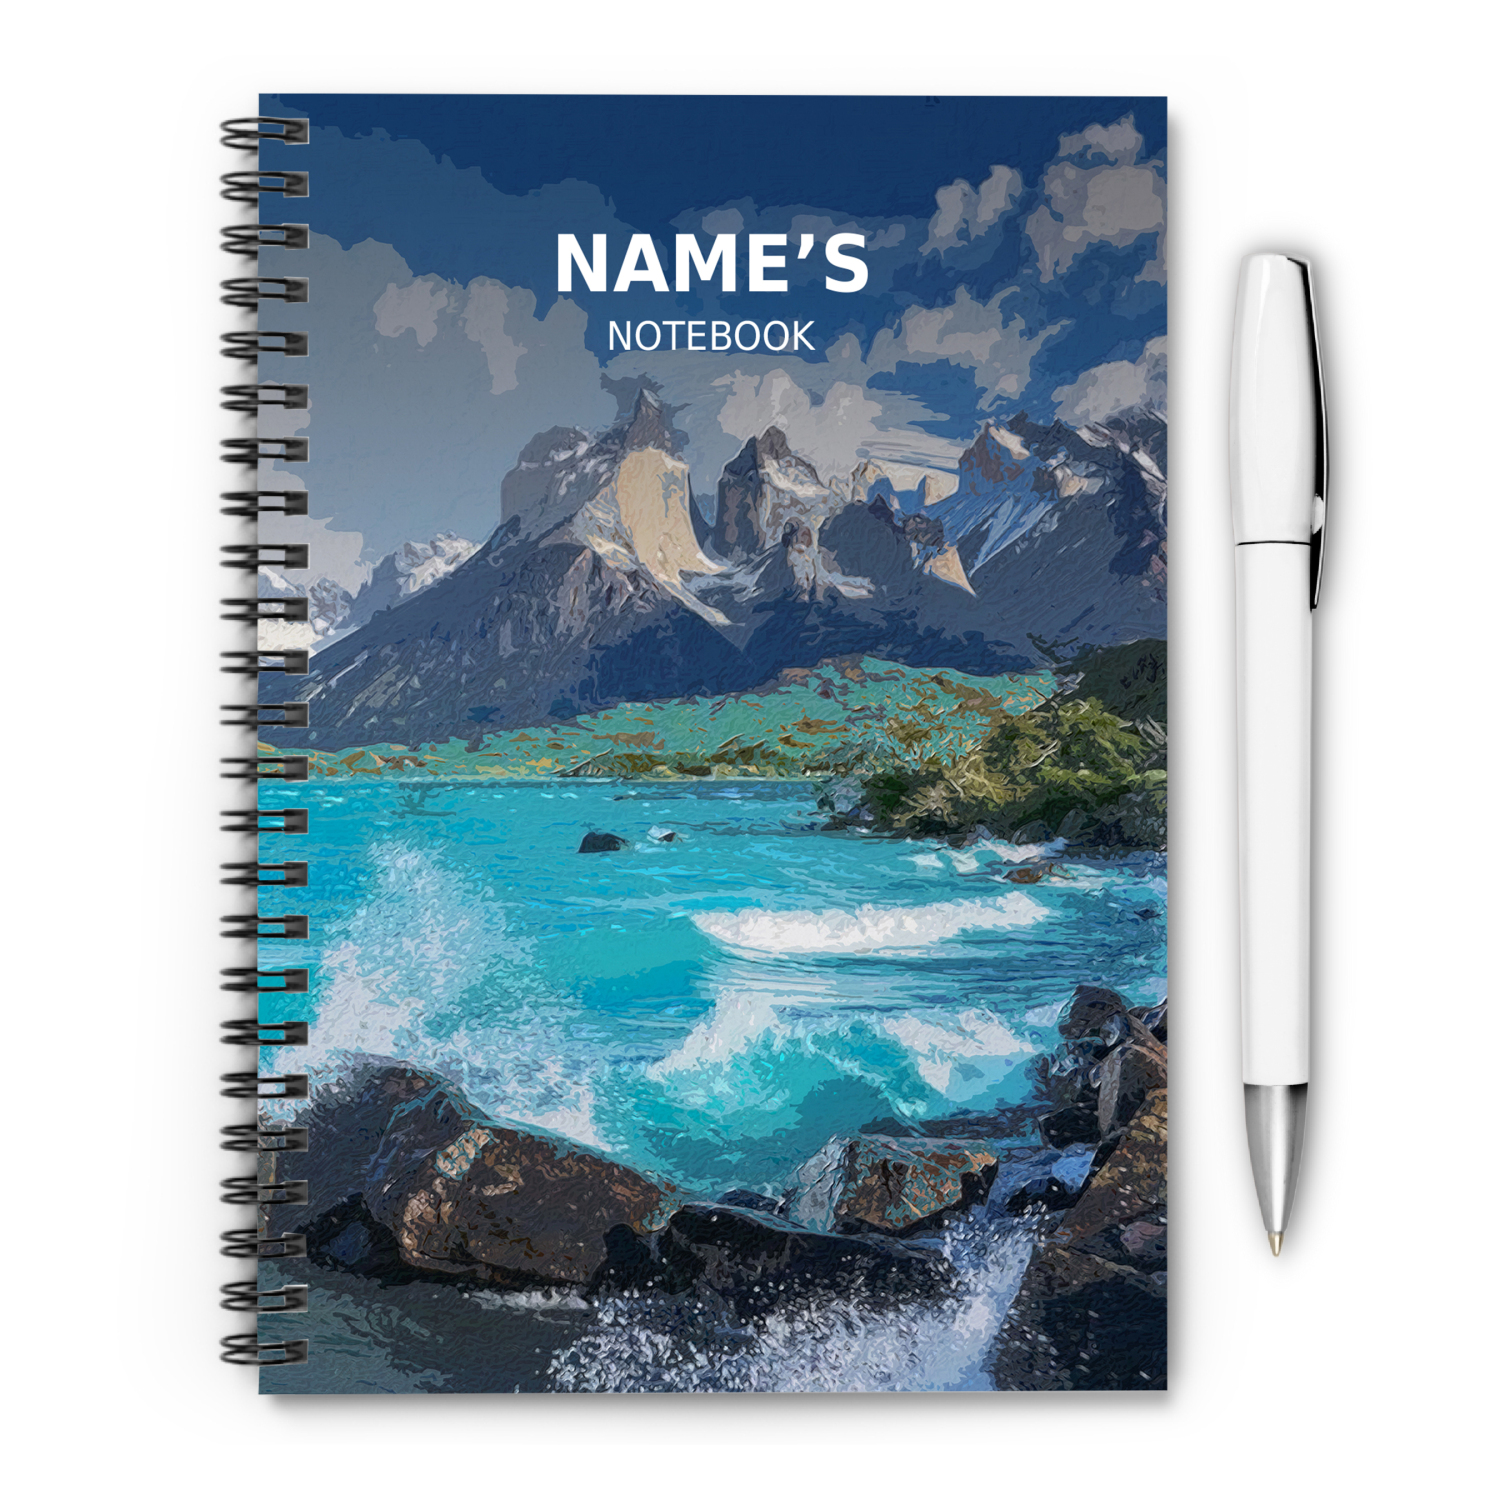 Tores Del Paine National Park - Chile - A5 Notebook - Single Note Book